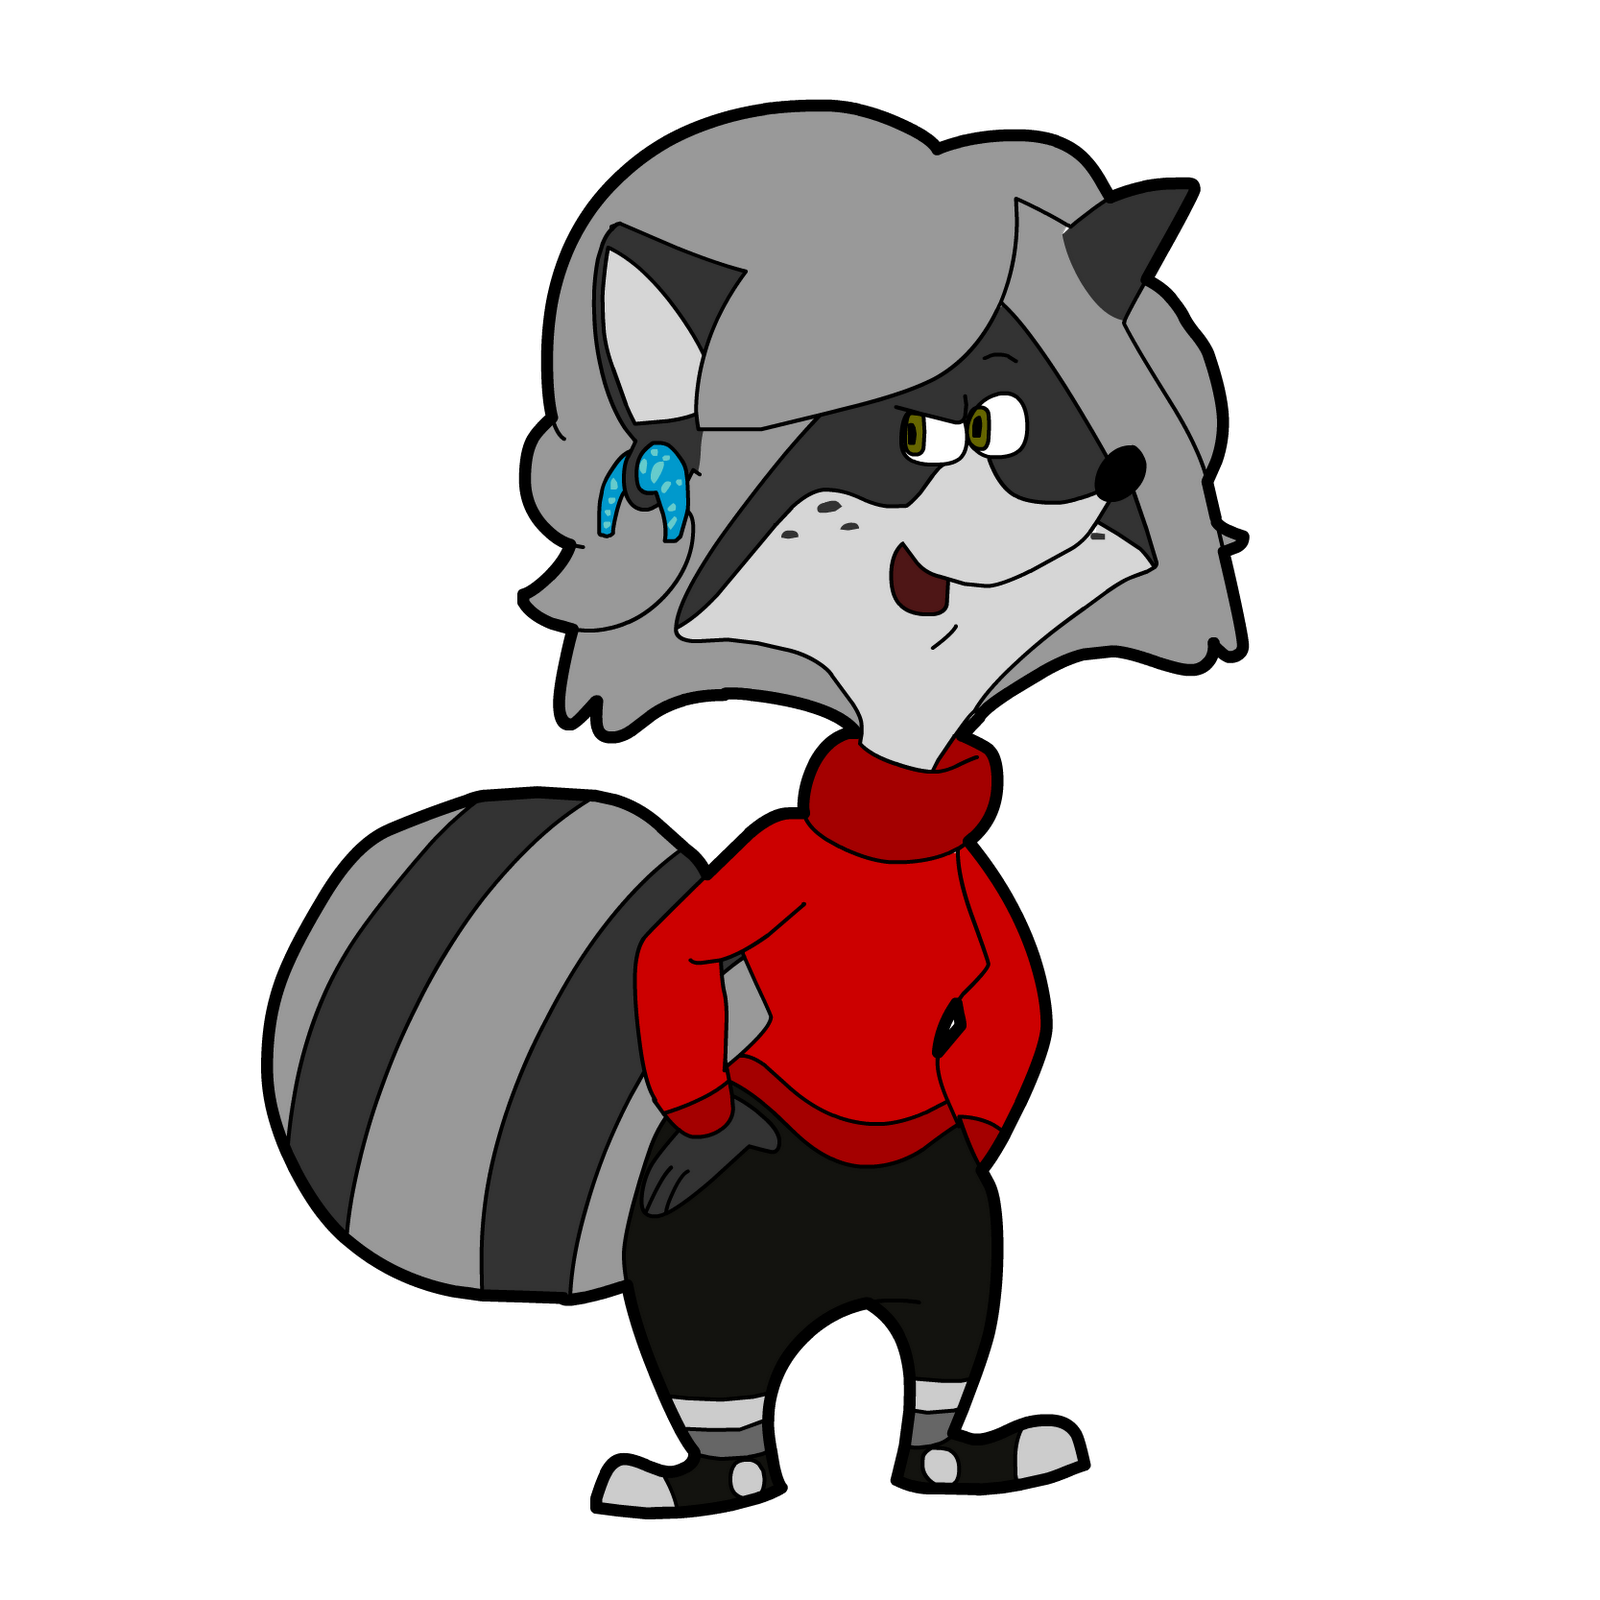 racoon clipart nocturnal animal